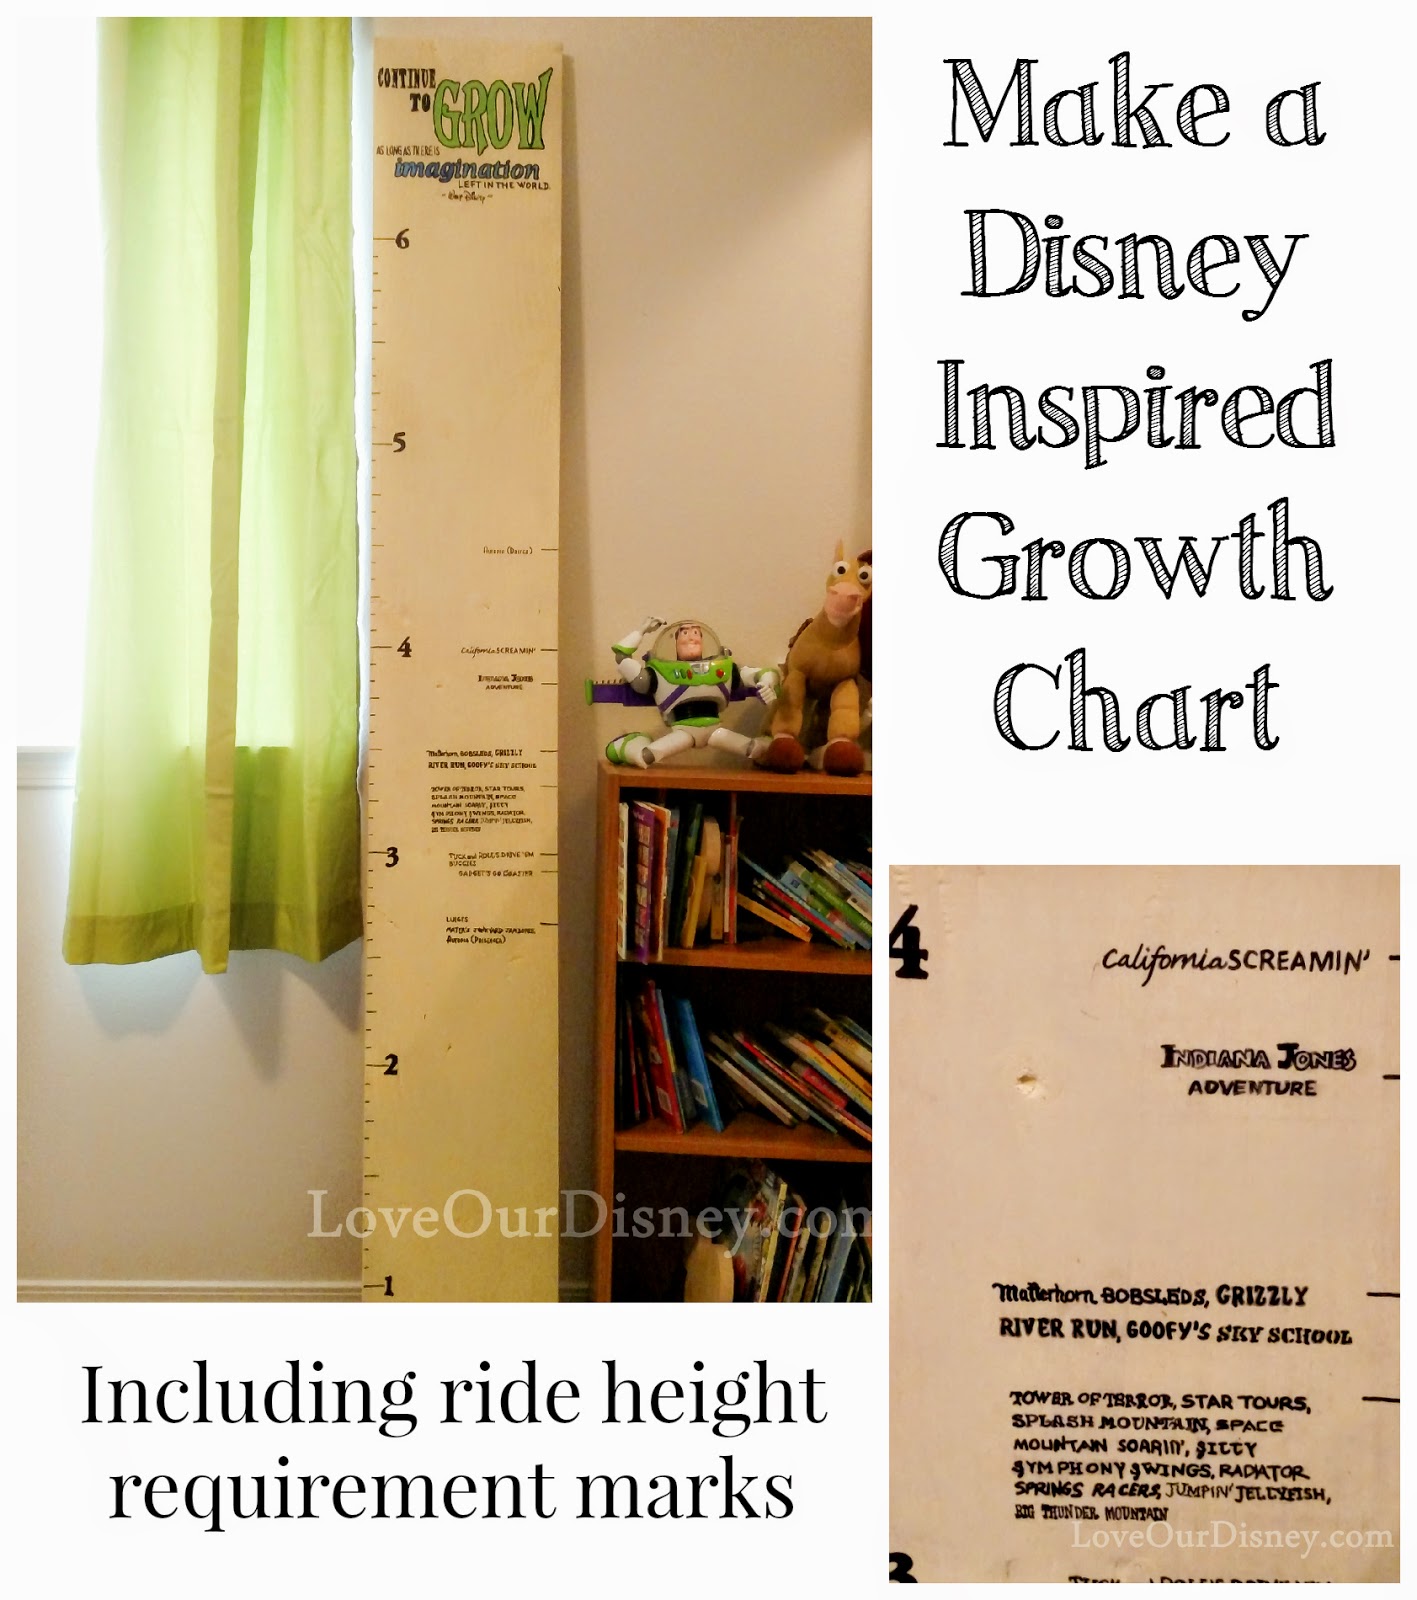 Disney growth chart with ride height requirements marked on it from LoveOurDisney.com